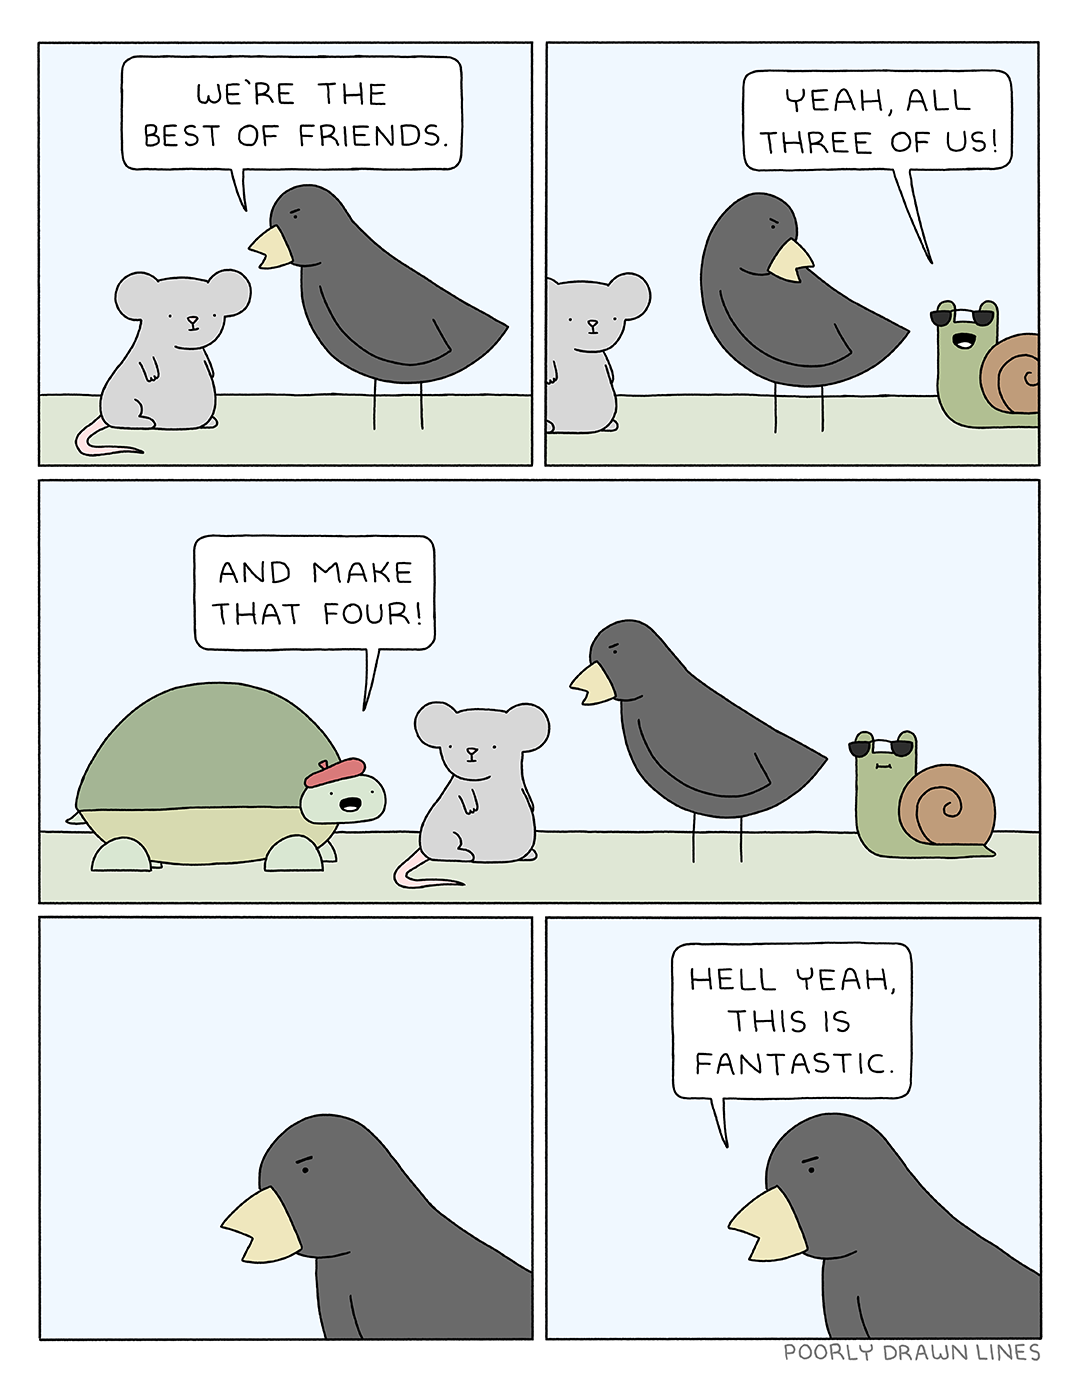 A comic by Poorly Drawn Lines where two animals say they are the best of friends, and two more friends appear to say they are best of friends as well, and then the main character finishes it with "hell yeah, this is fantastic." It's probably funnier with more visual context, I'm sorry.